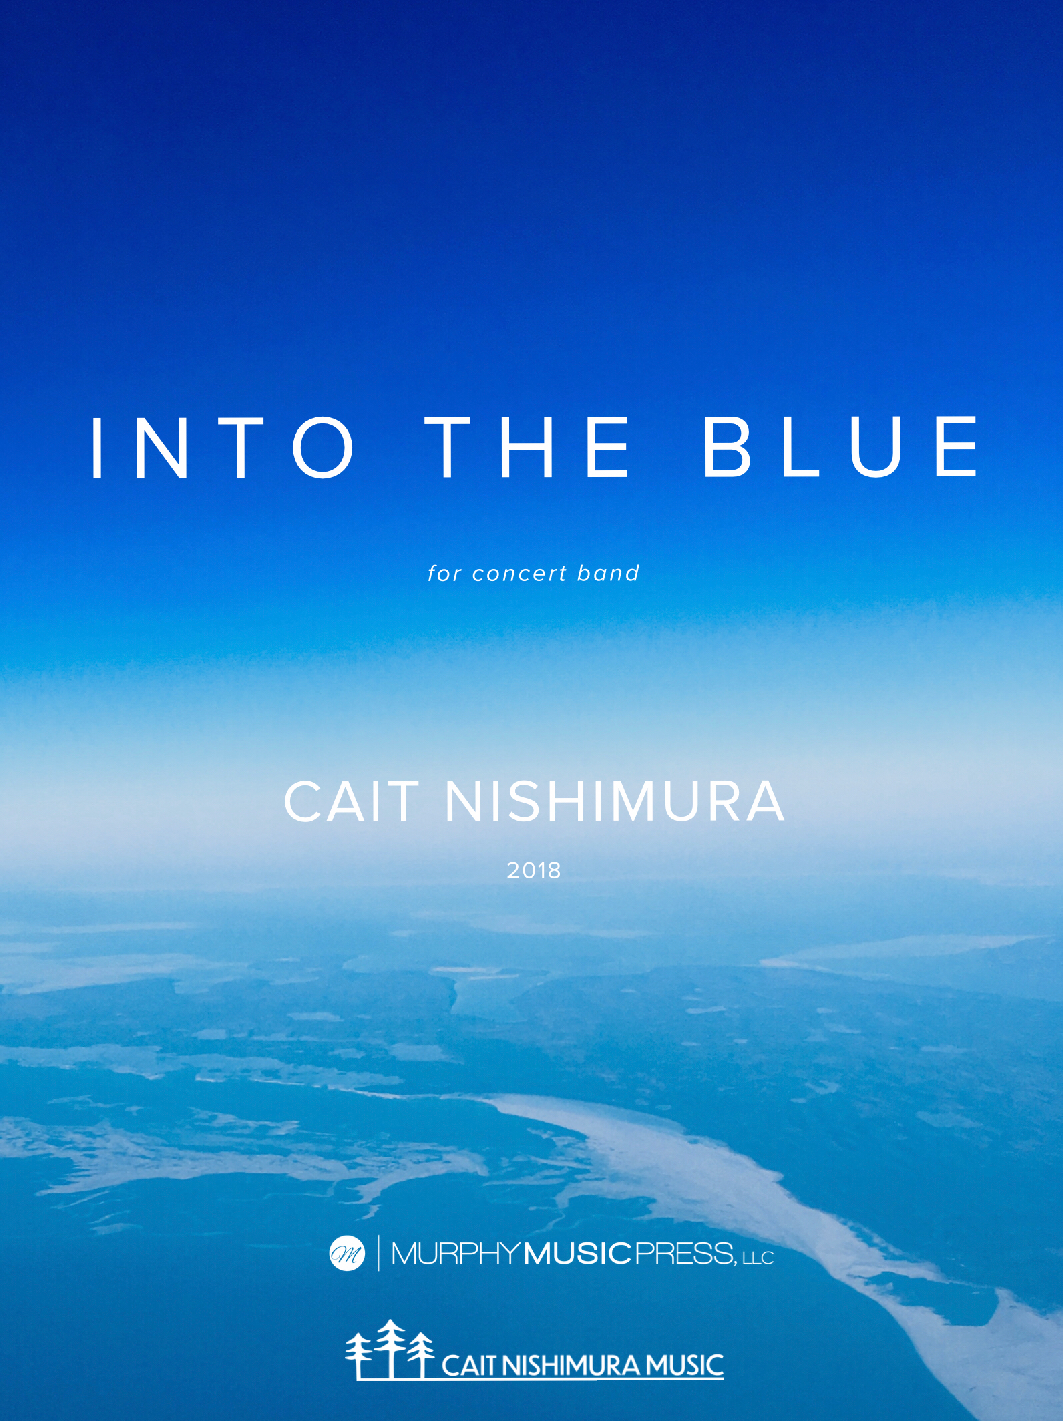 Into The Blue by Cait Nishimura